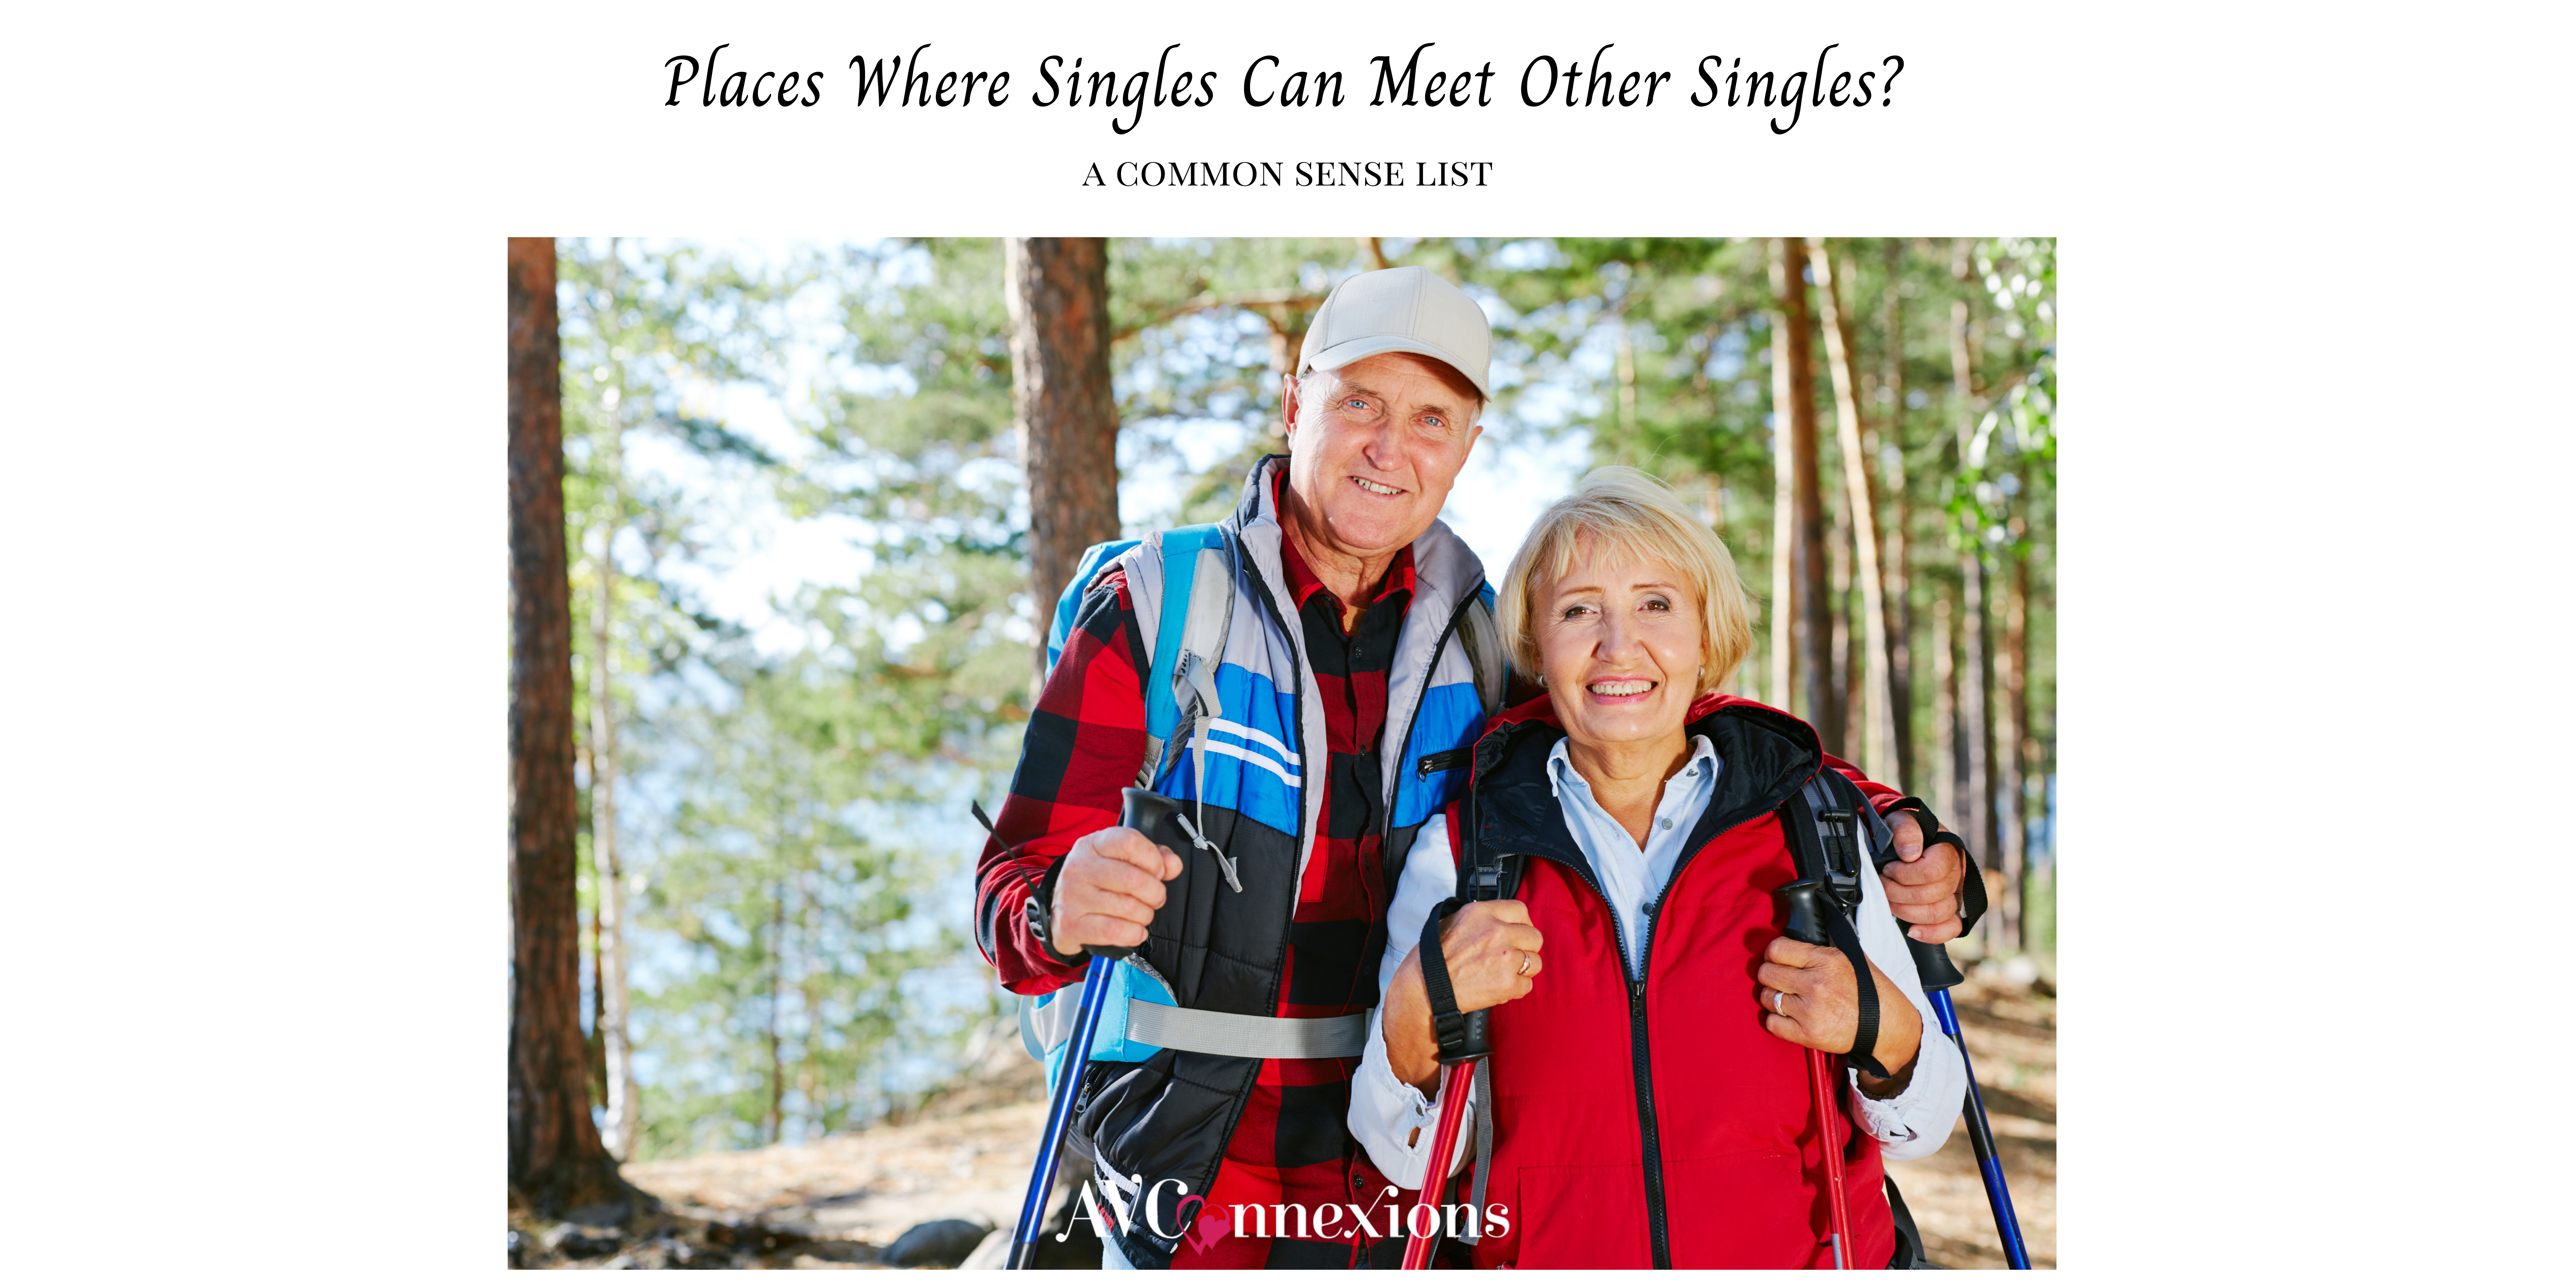 Places where singles can meet other singles